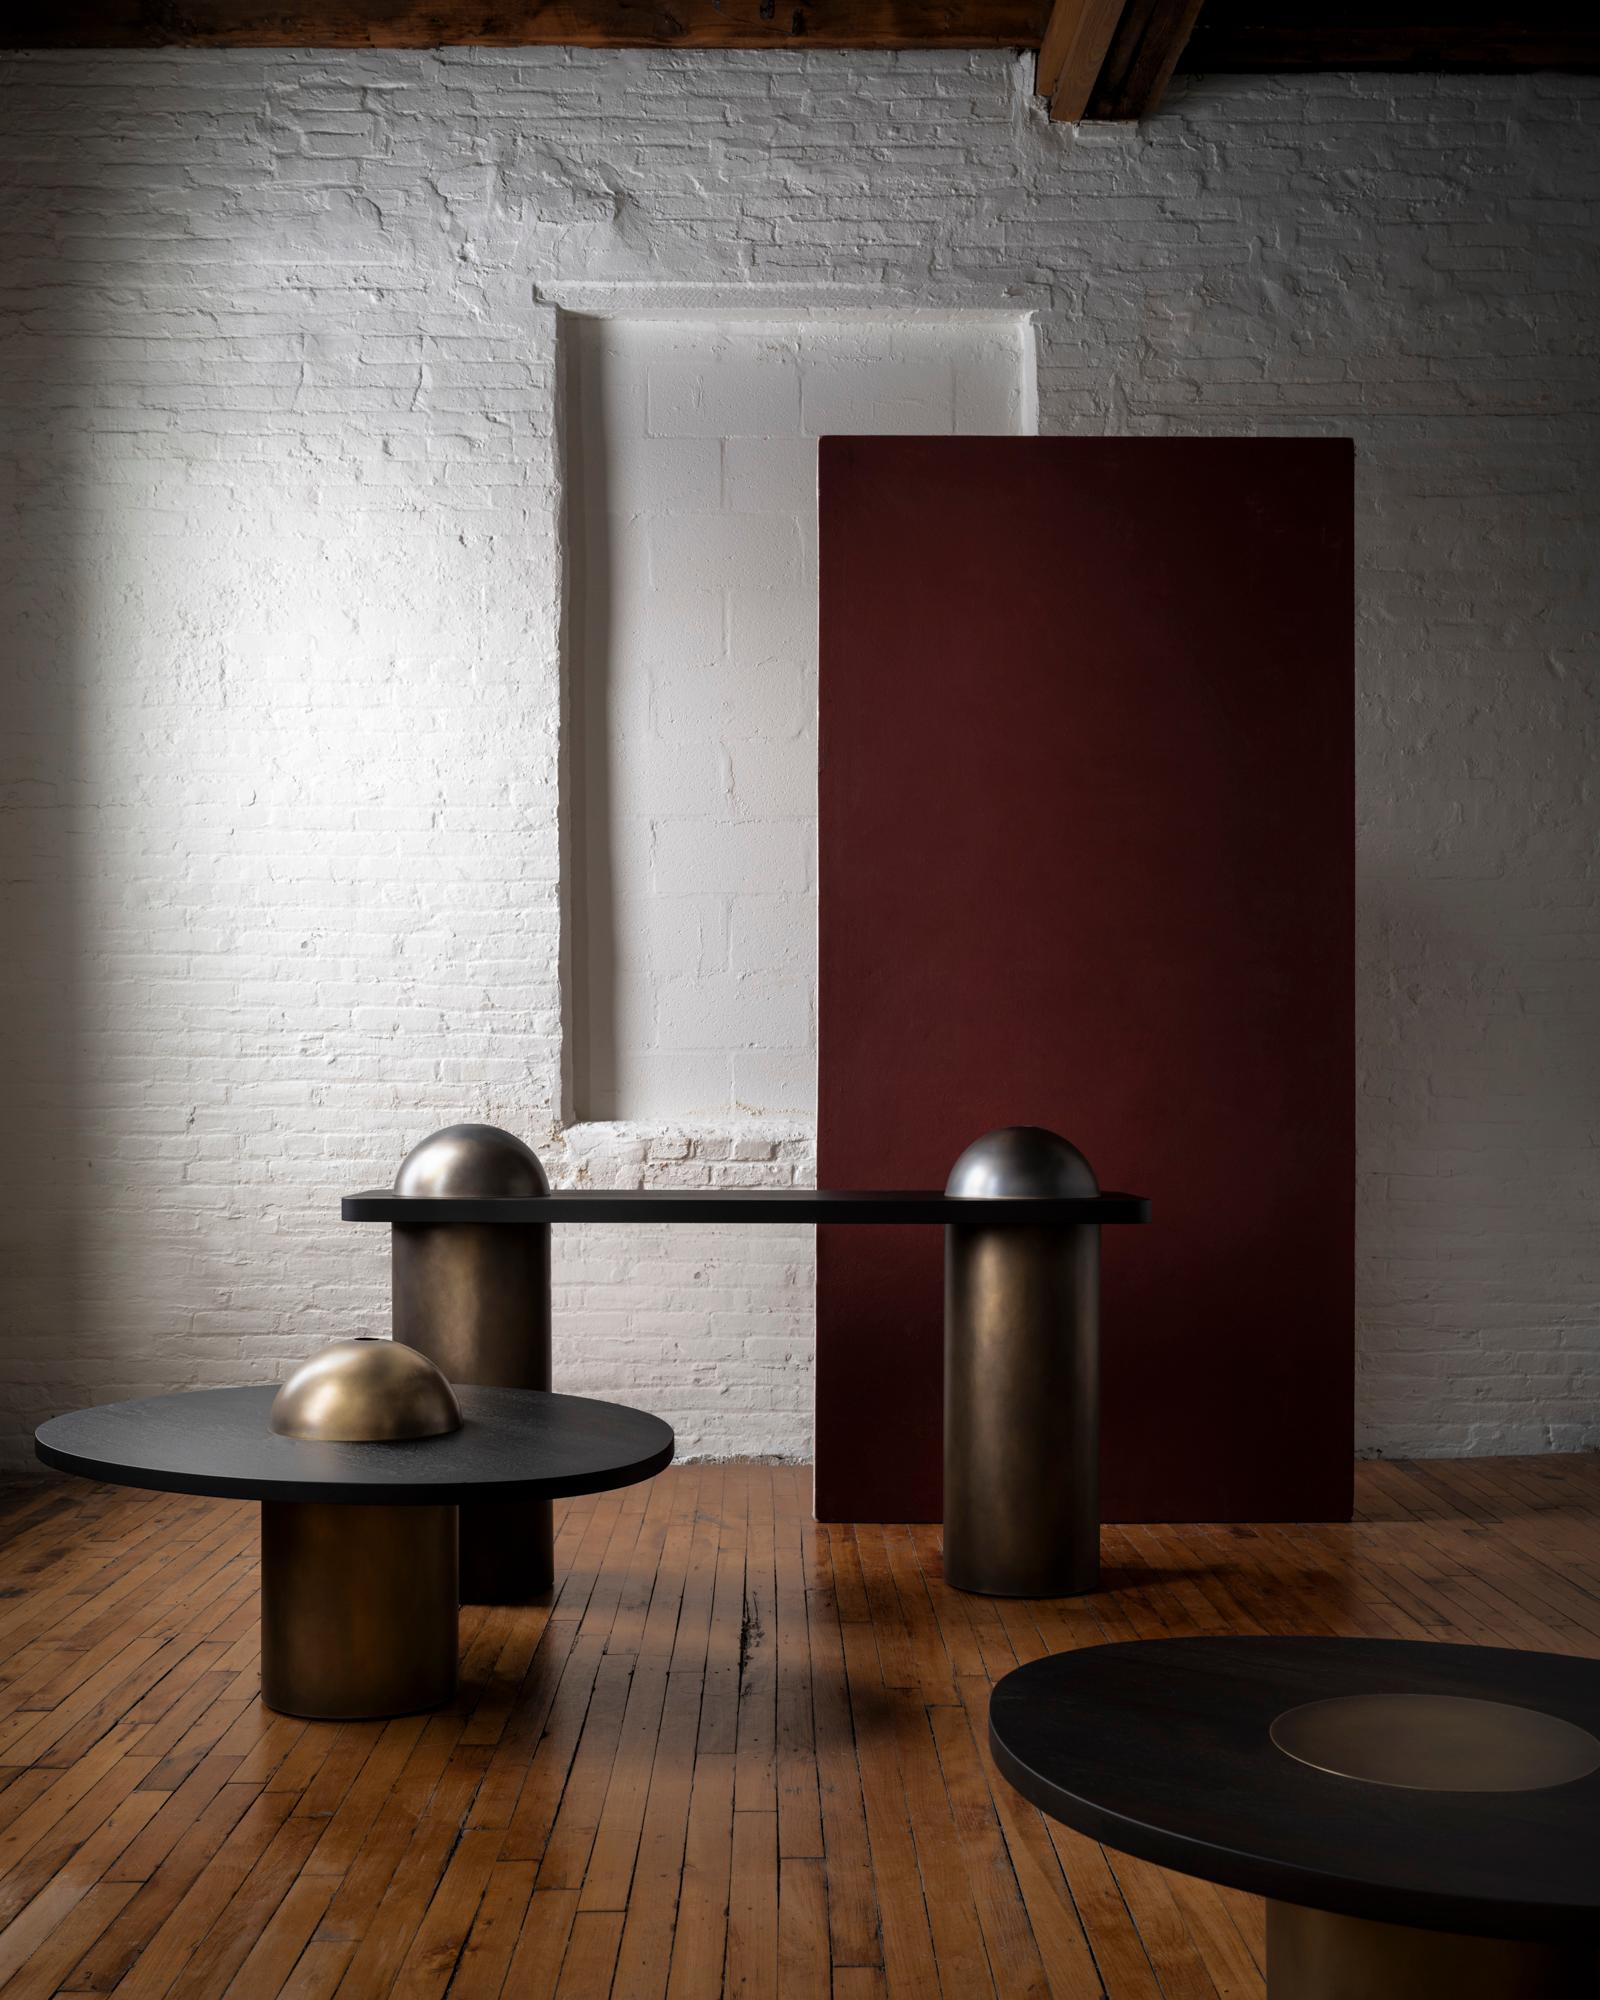 Inspired by the form and function of grain silos, the sculptural Silo Console Table features solid wood and hand-finished brass or stainless steel wrapped legs.

This listing includes two removable brass domes that sit atop the table. The hollow